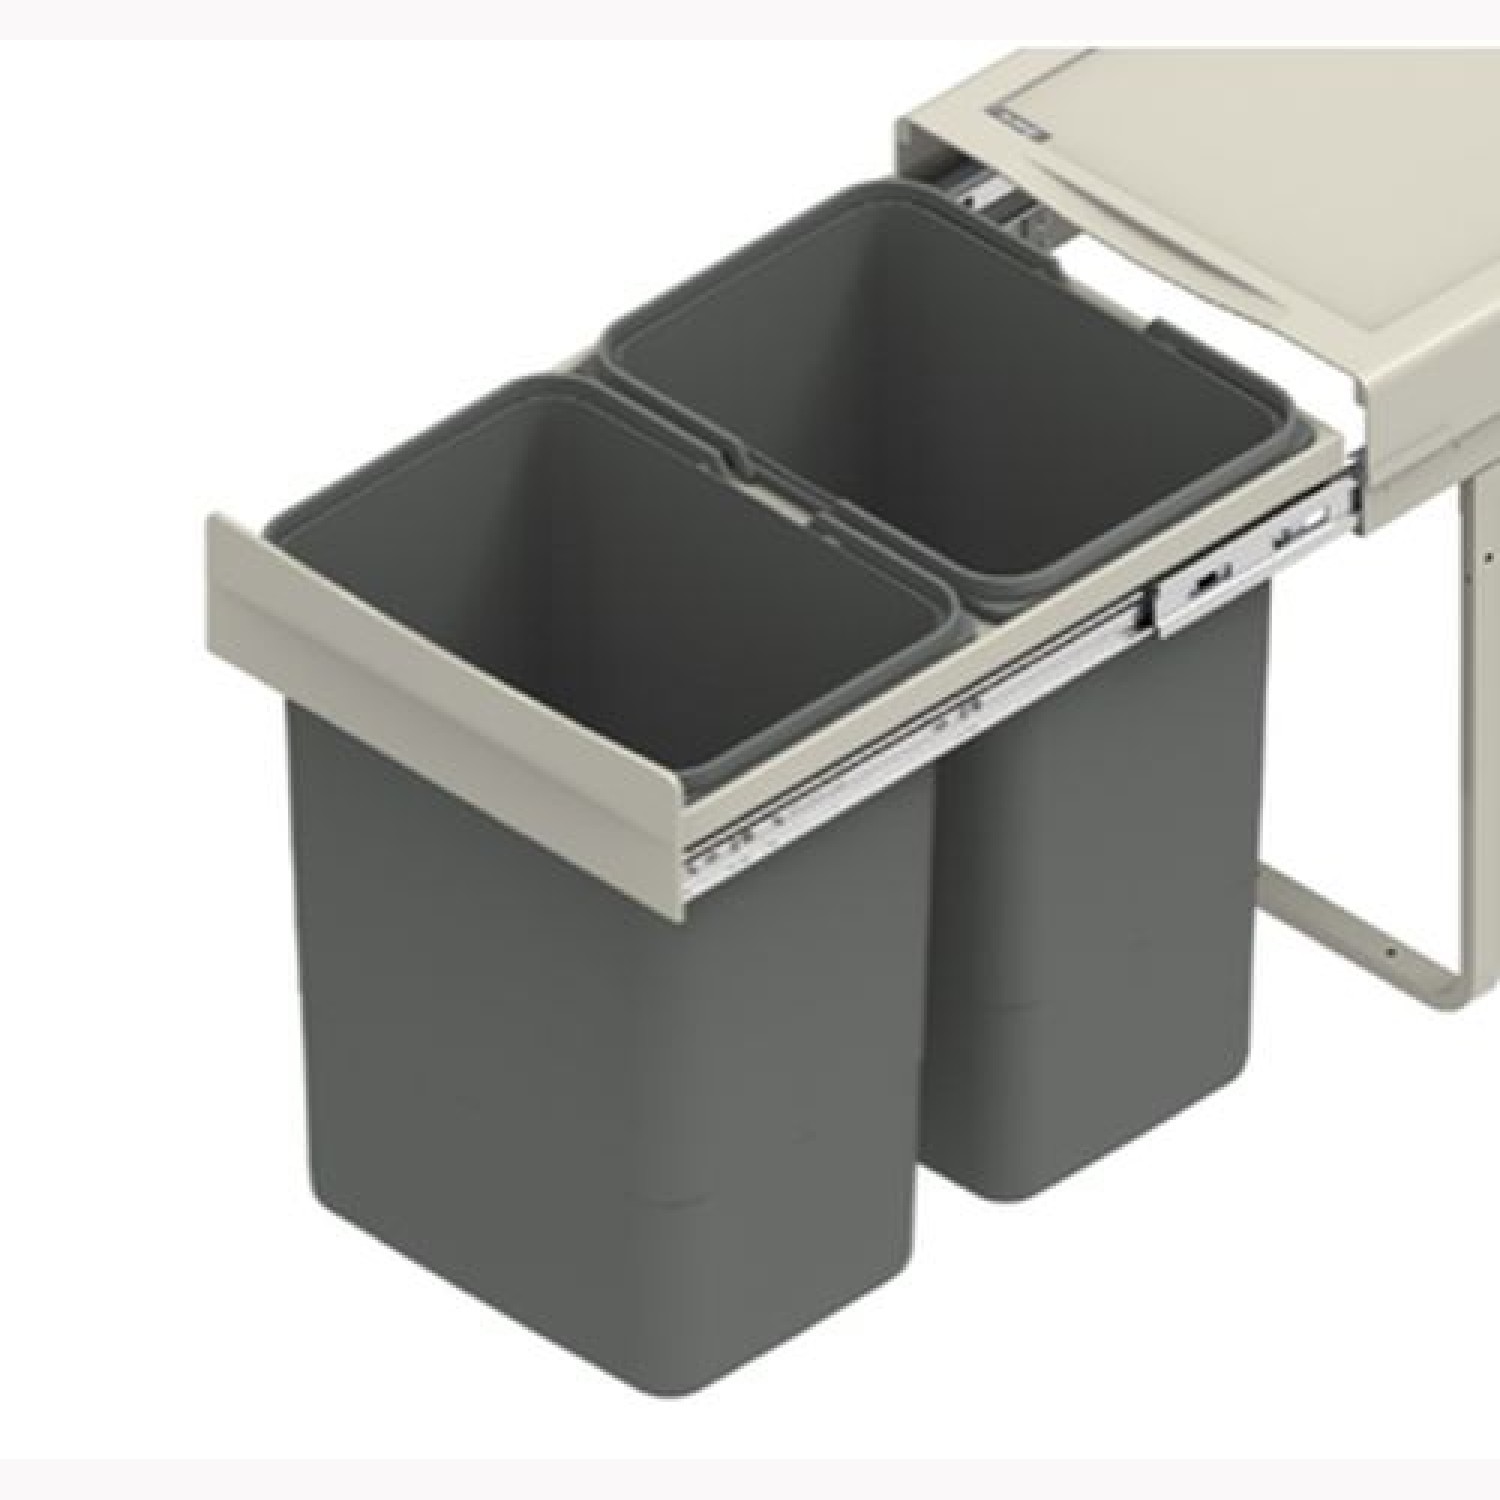 with front fixing brackets REJS RECYCLE BIN PULL OUT SOFT CLOSE KITCHEN WASTE BIN 300MM JC-604 30 LTR 